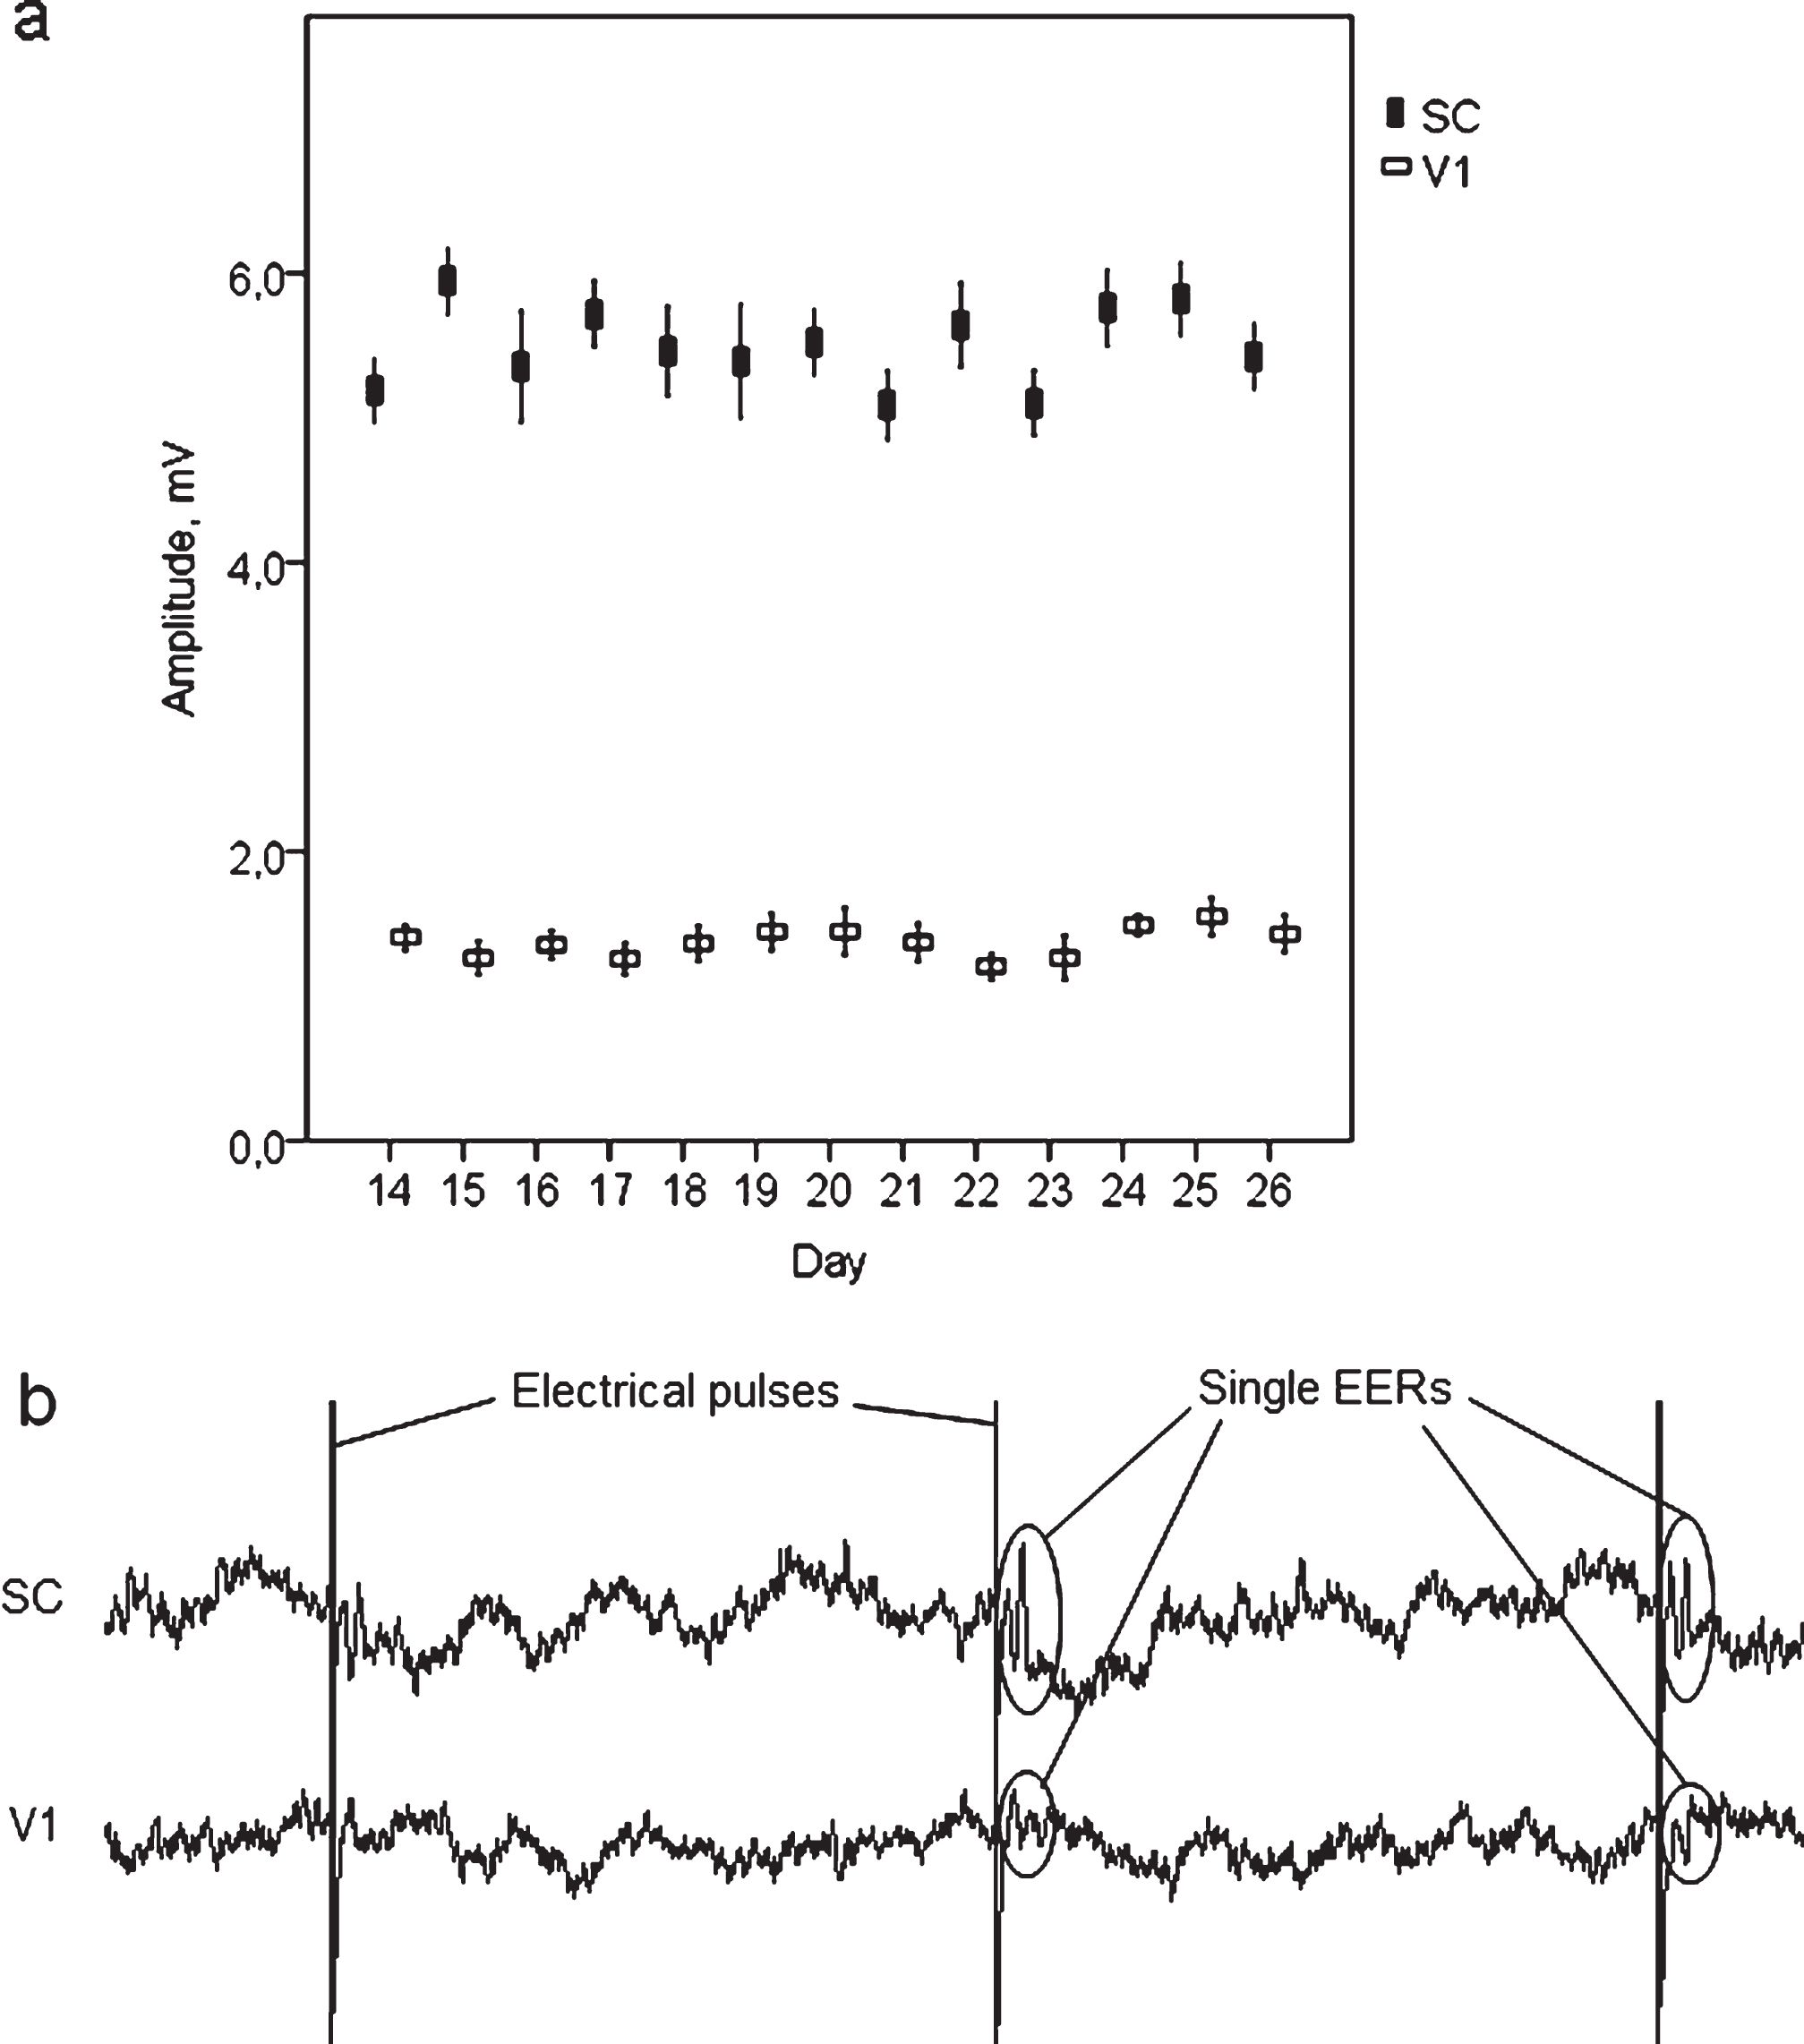 (a) Steadiness of peak-to-peak amplitude of visual evoked potentials recorded on 14– 26 days after the surgery demonstrates stability of the electrodes. (b) raw LFP data with pulse artefacts and single electrically evoked responses recorded from V1 and SC.